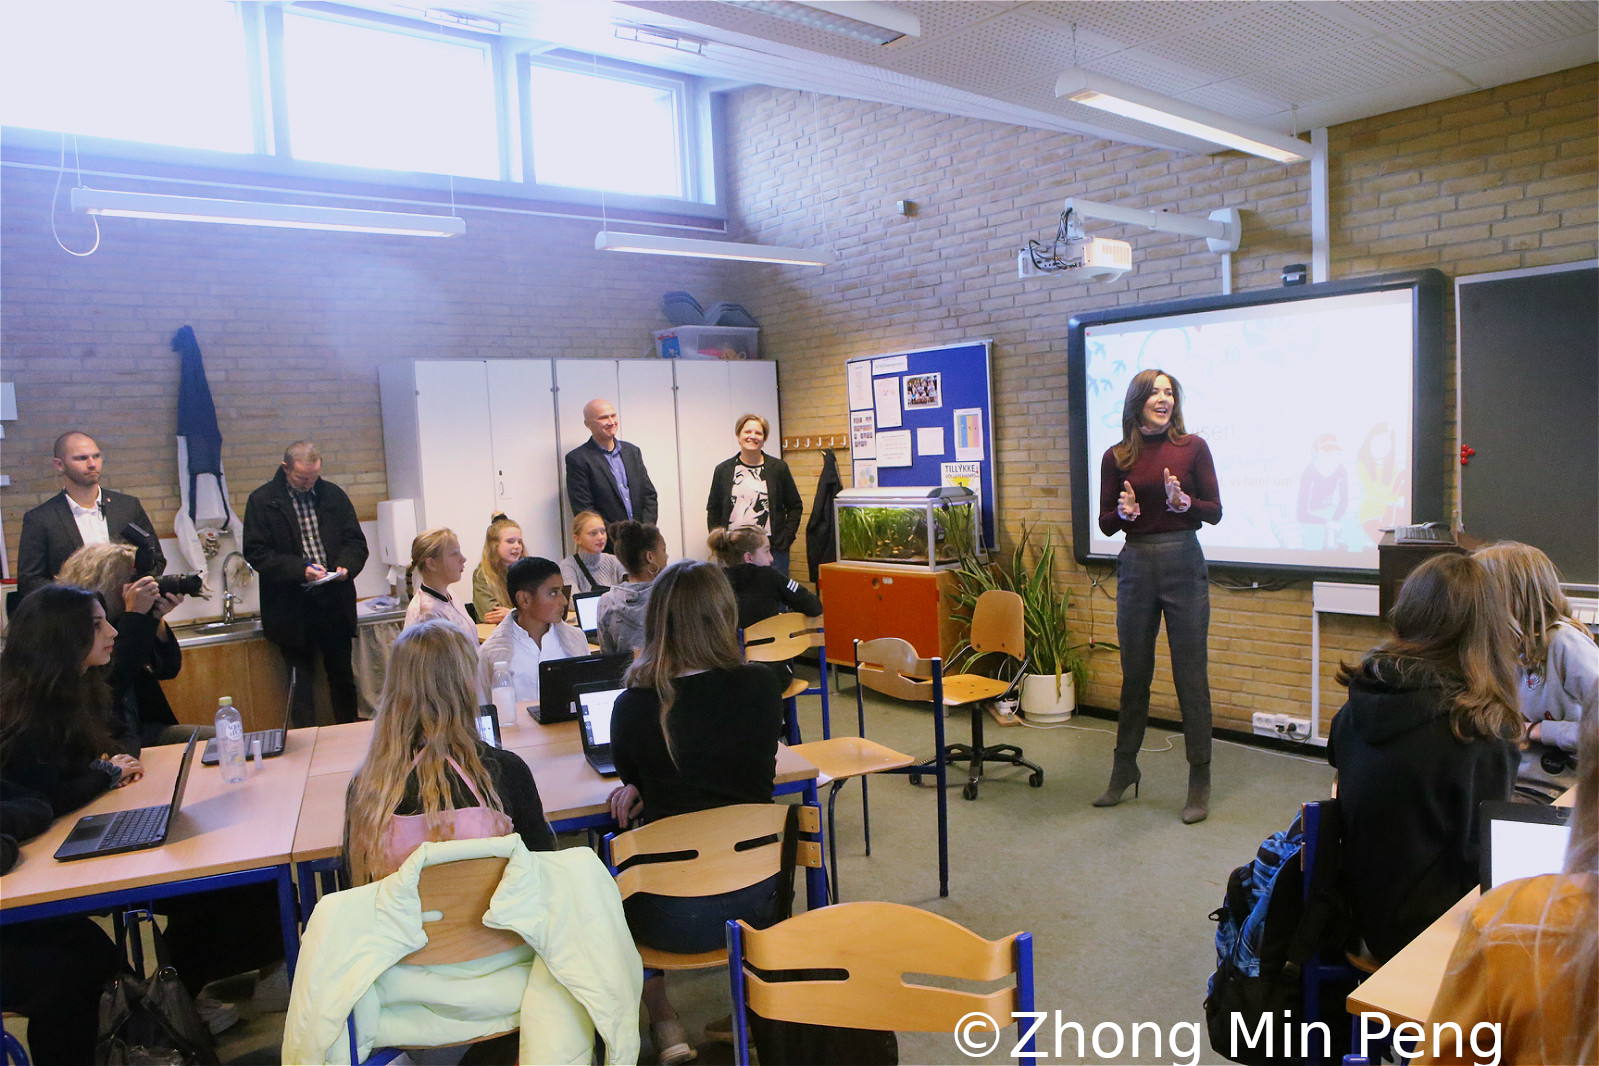 Crownprincess Mary of Denmark talks to the students